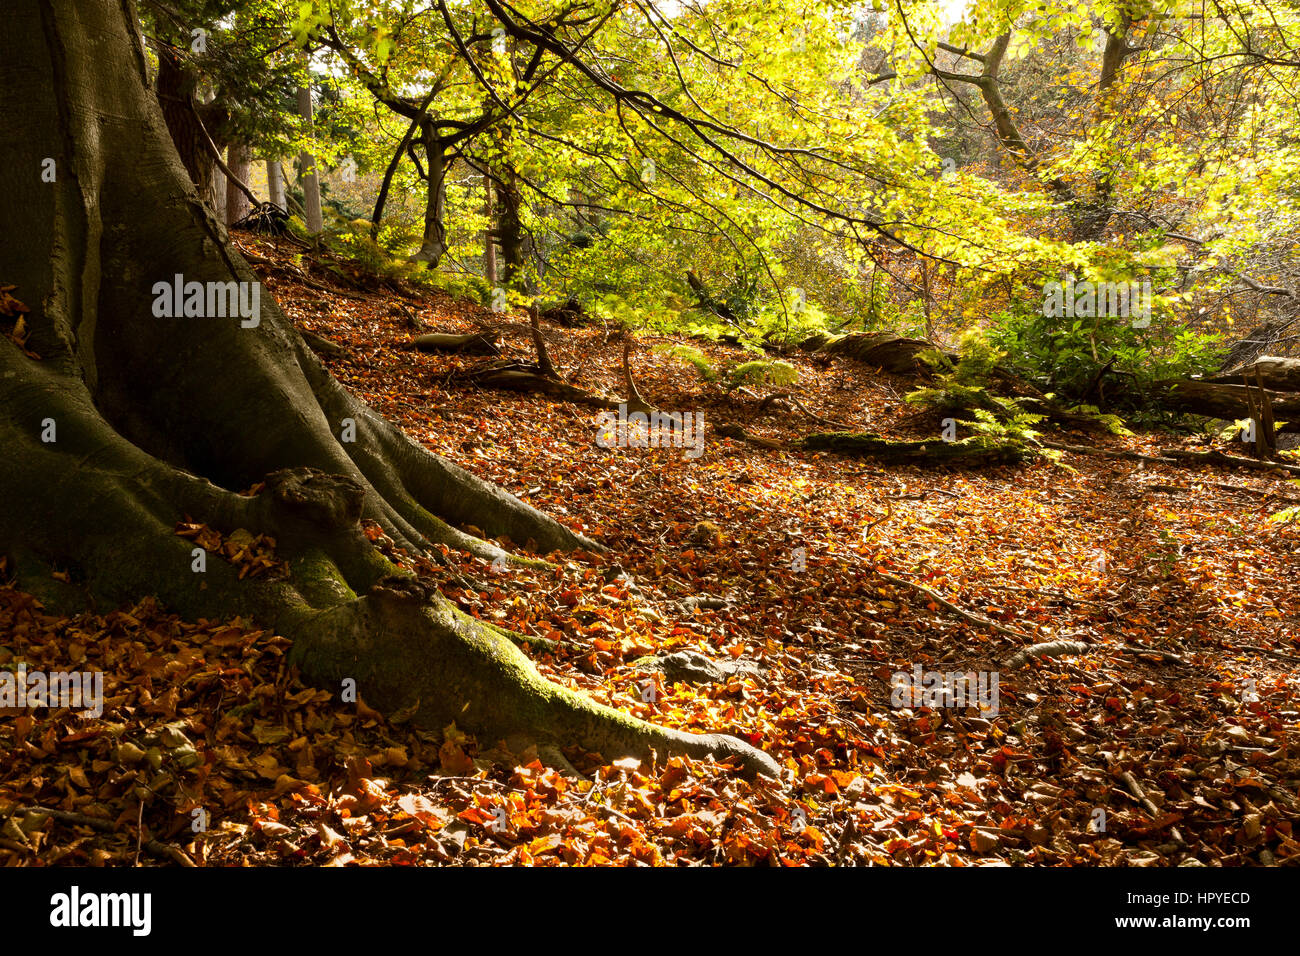 Sunlight shining through leaves in woodland Stock Photo